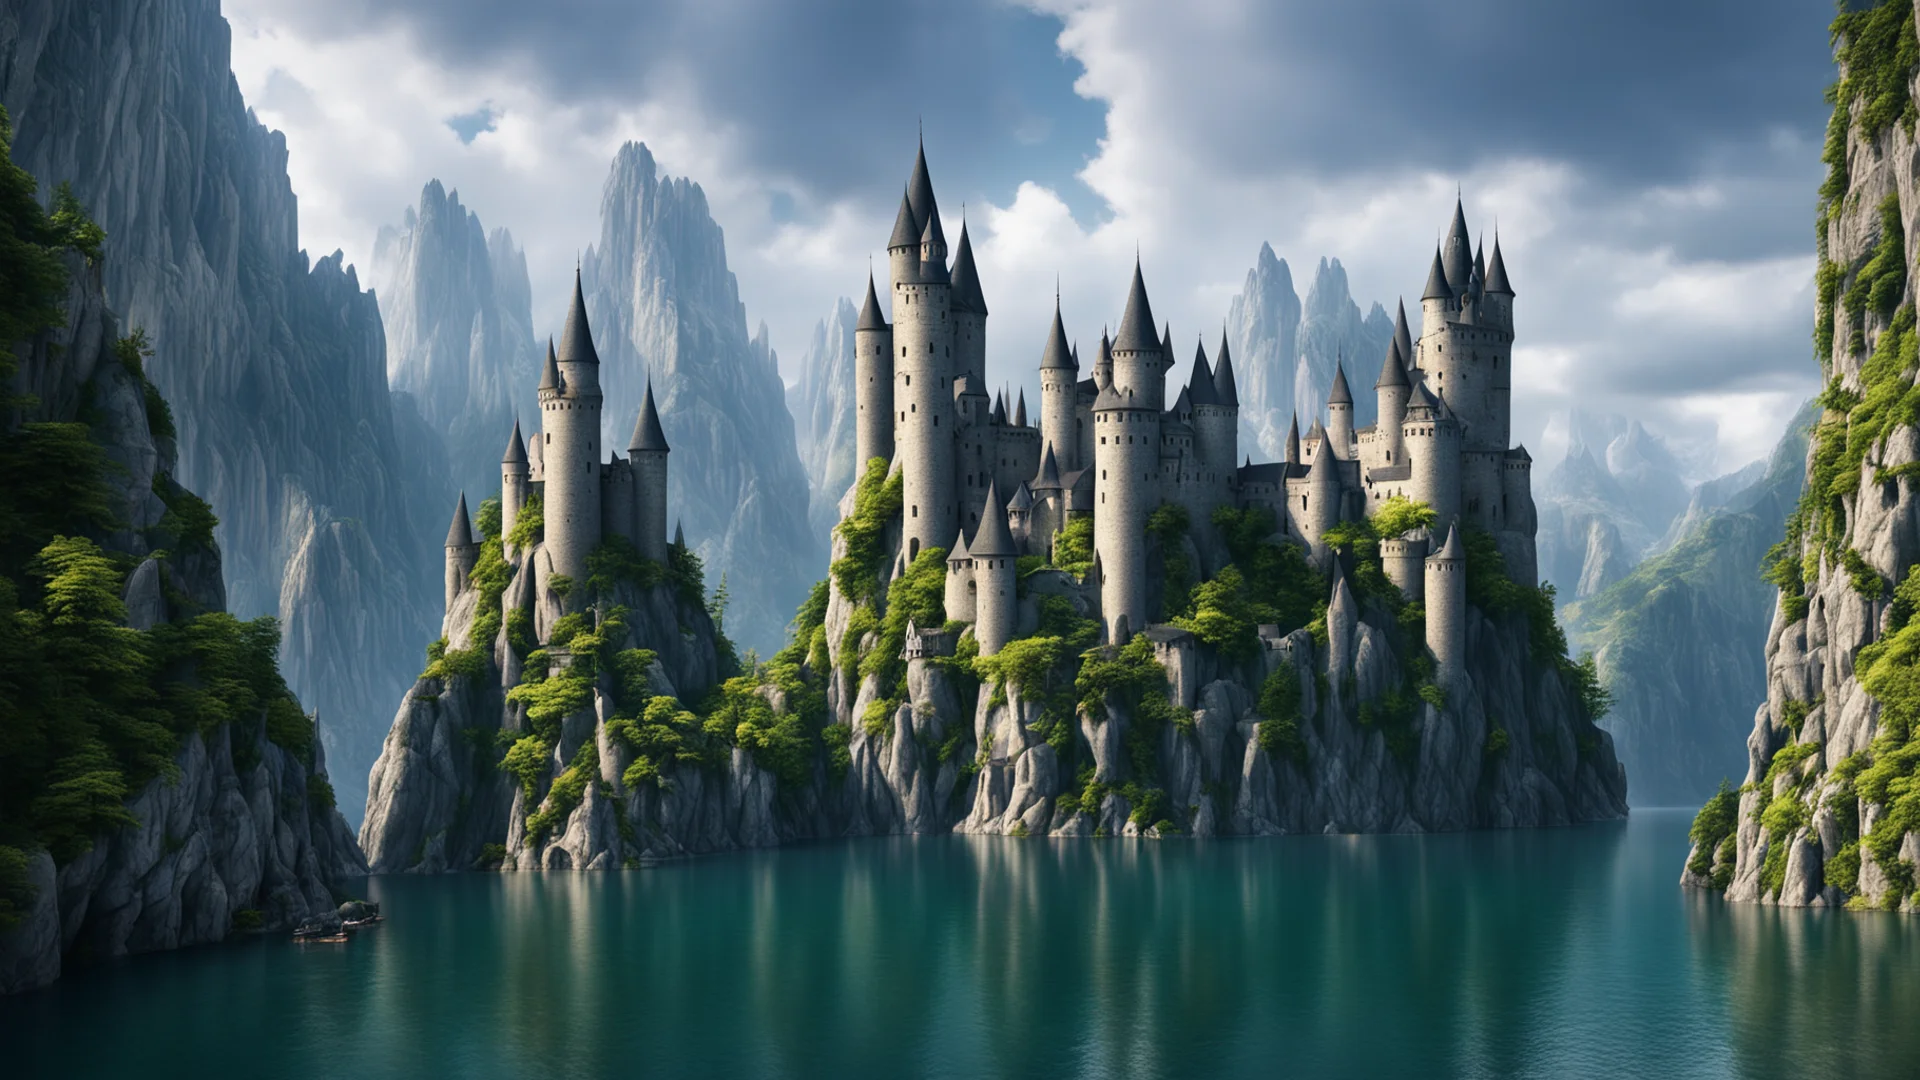 epic cliffs castle over lake large spiraling towers on castle epic shot realistic unreal trending confident engaging wow artstation art 3 wide